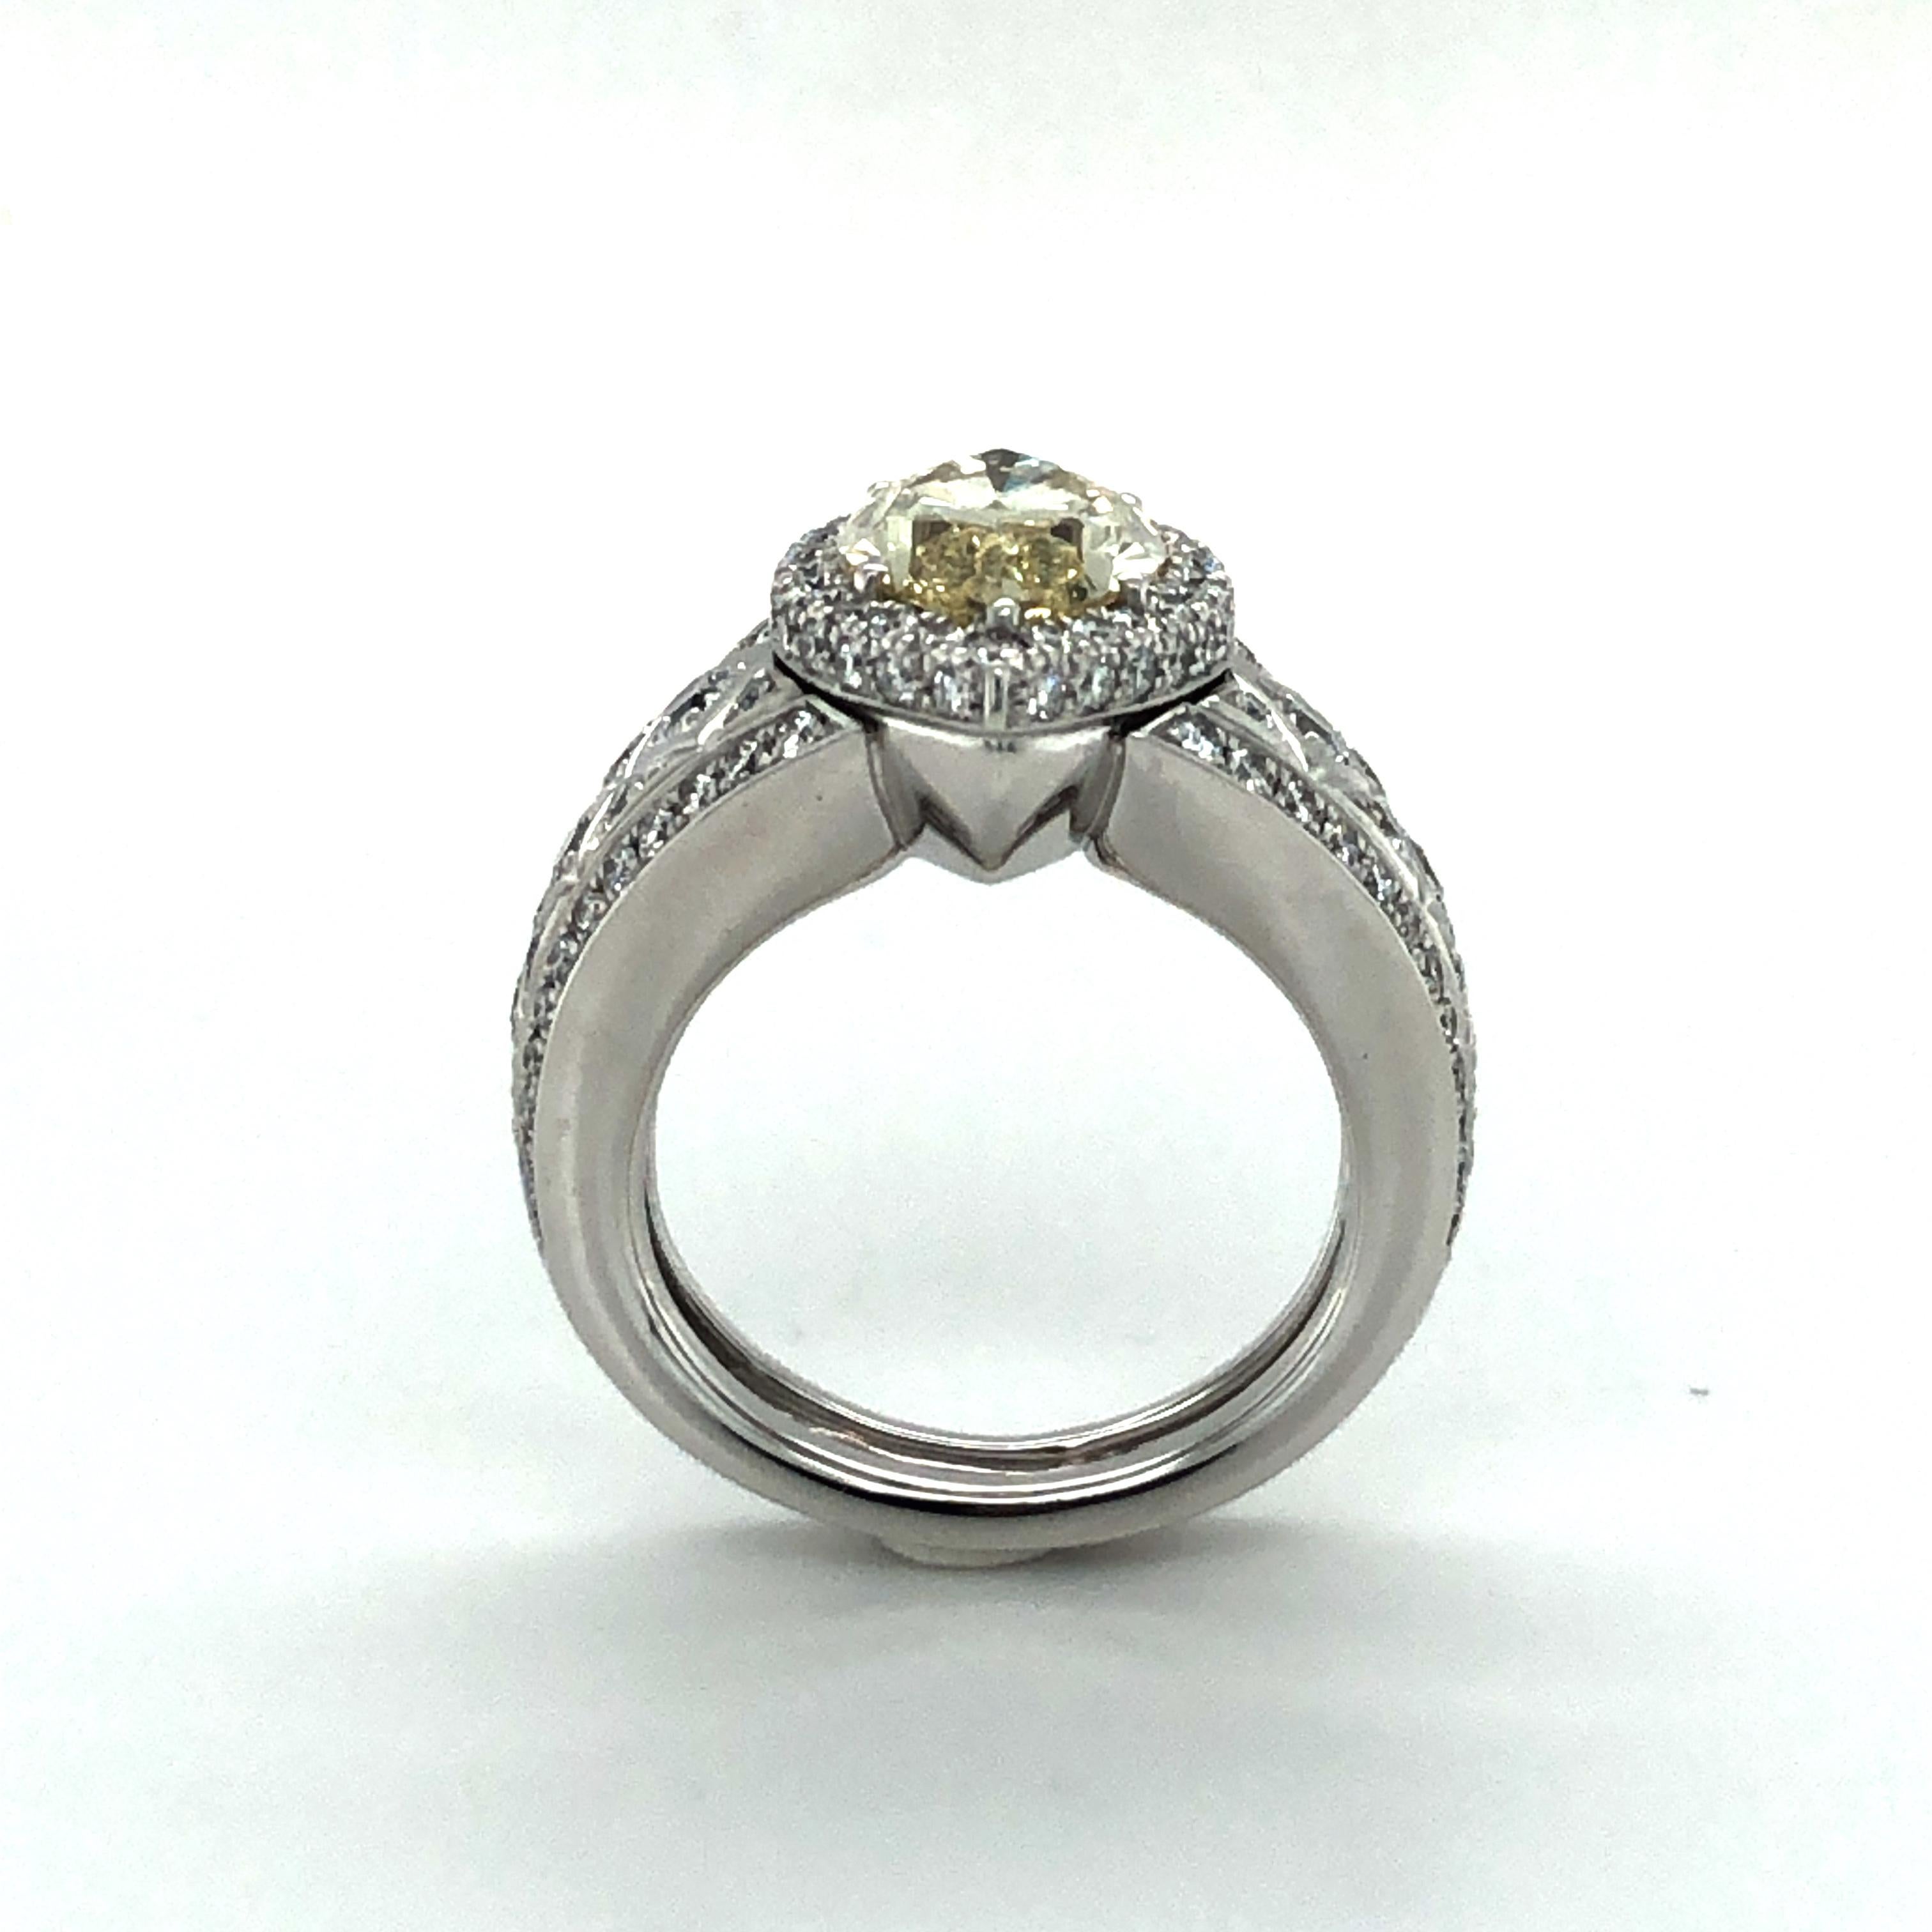 Women's or Men's 2.77 Carat Marquise-Cut Diamond Ring by Avalon Swiss in 18 Karat White Gold For Sale